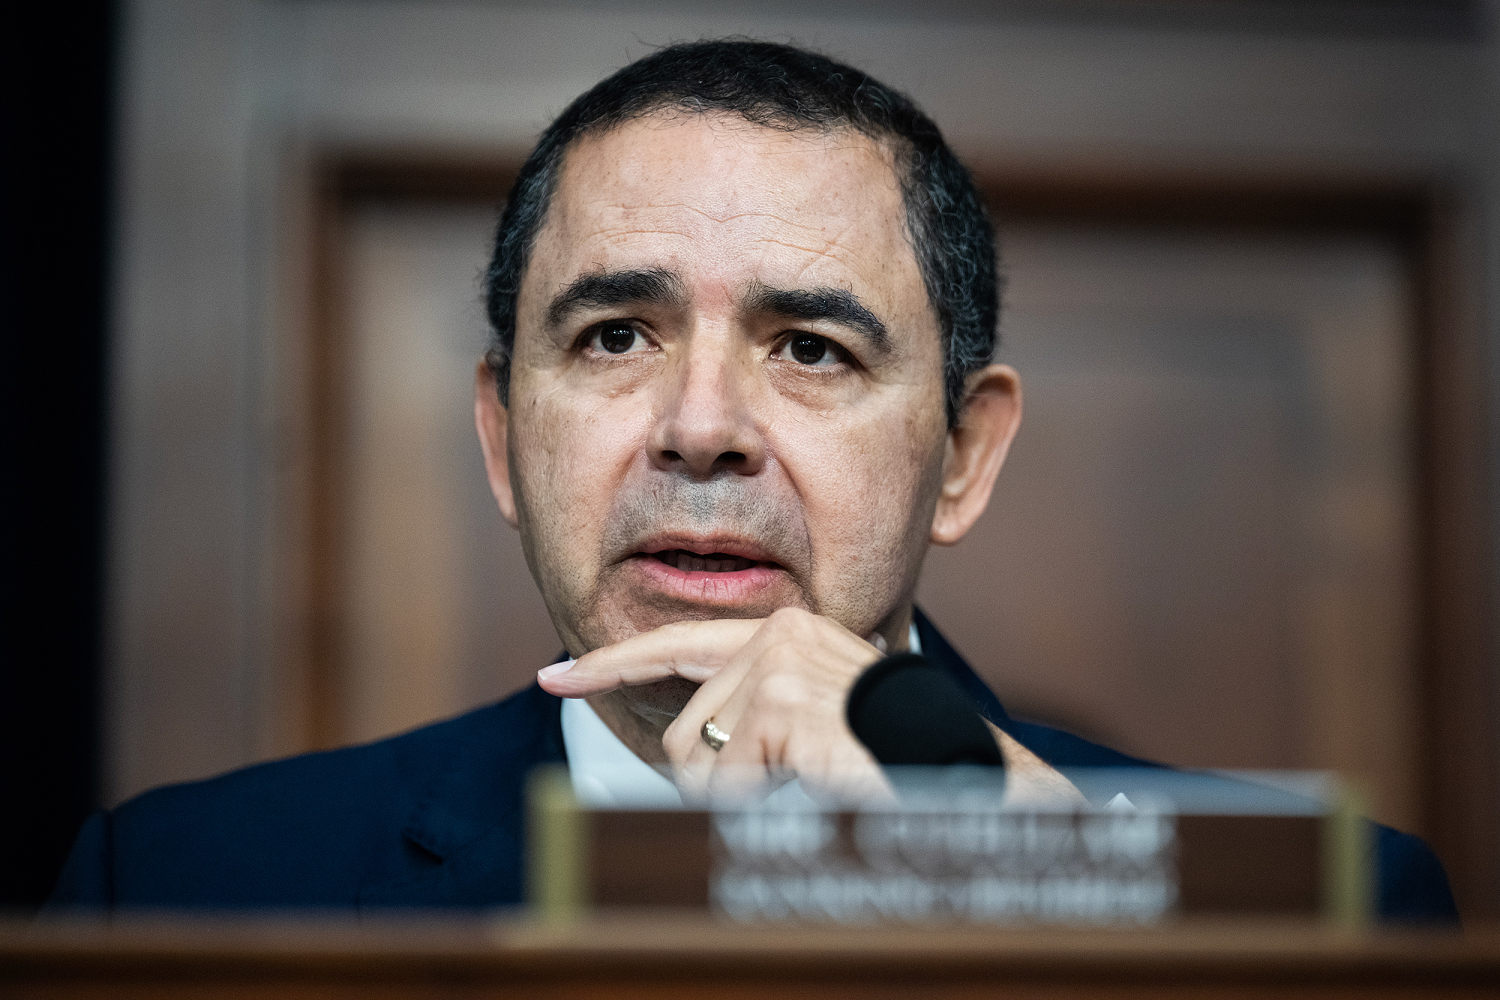 House Democrat indicted by DOJ, undermining GOP talking points